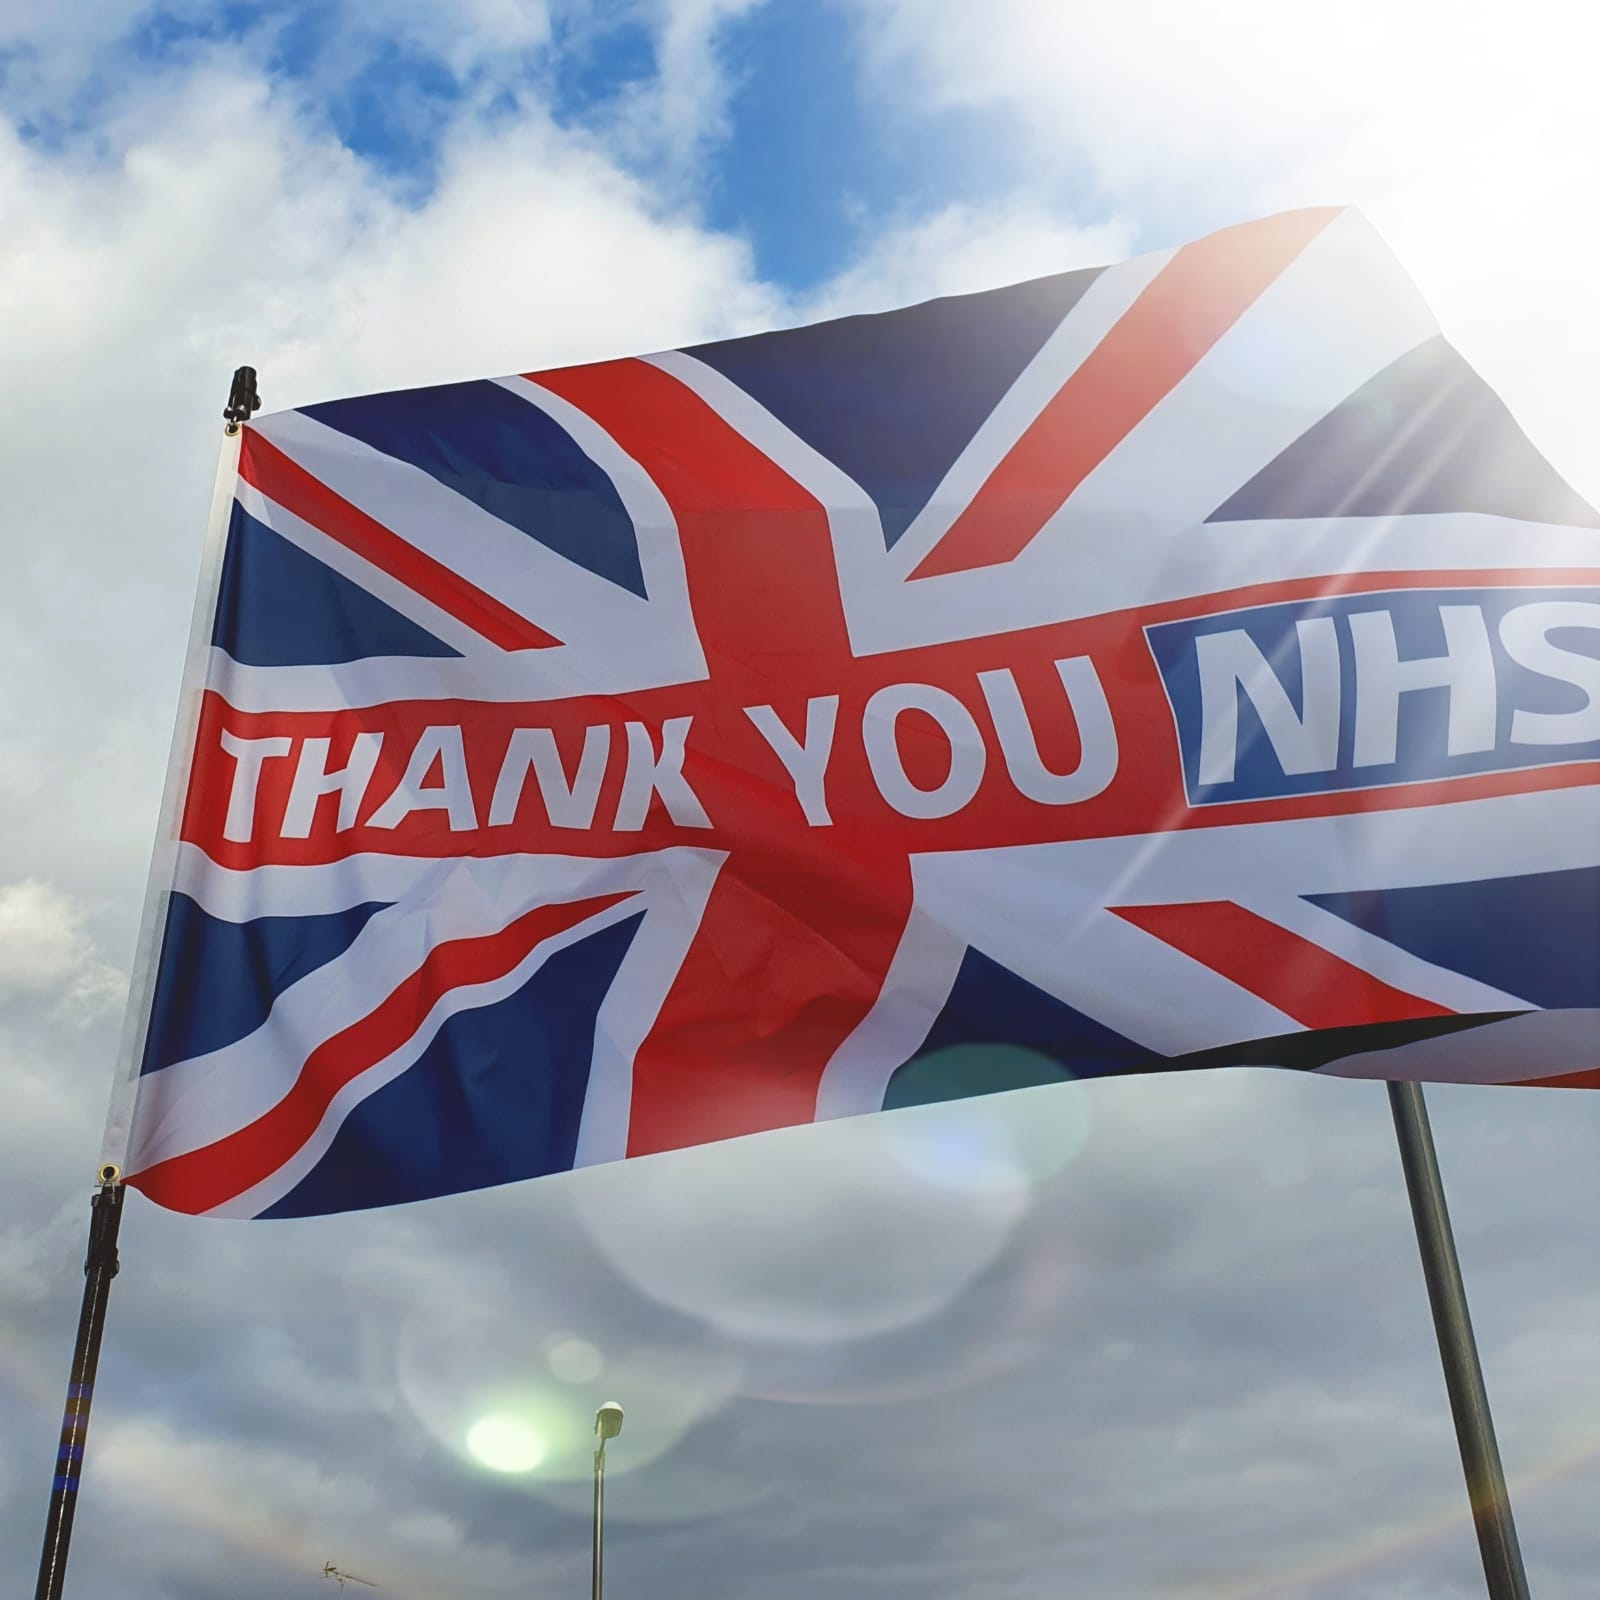 2020 NEW THANK YOU NHS UNION JACK Polyester FLAG 5ft X 3ft 10% DONATION TO NHS 